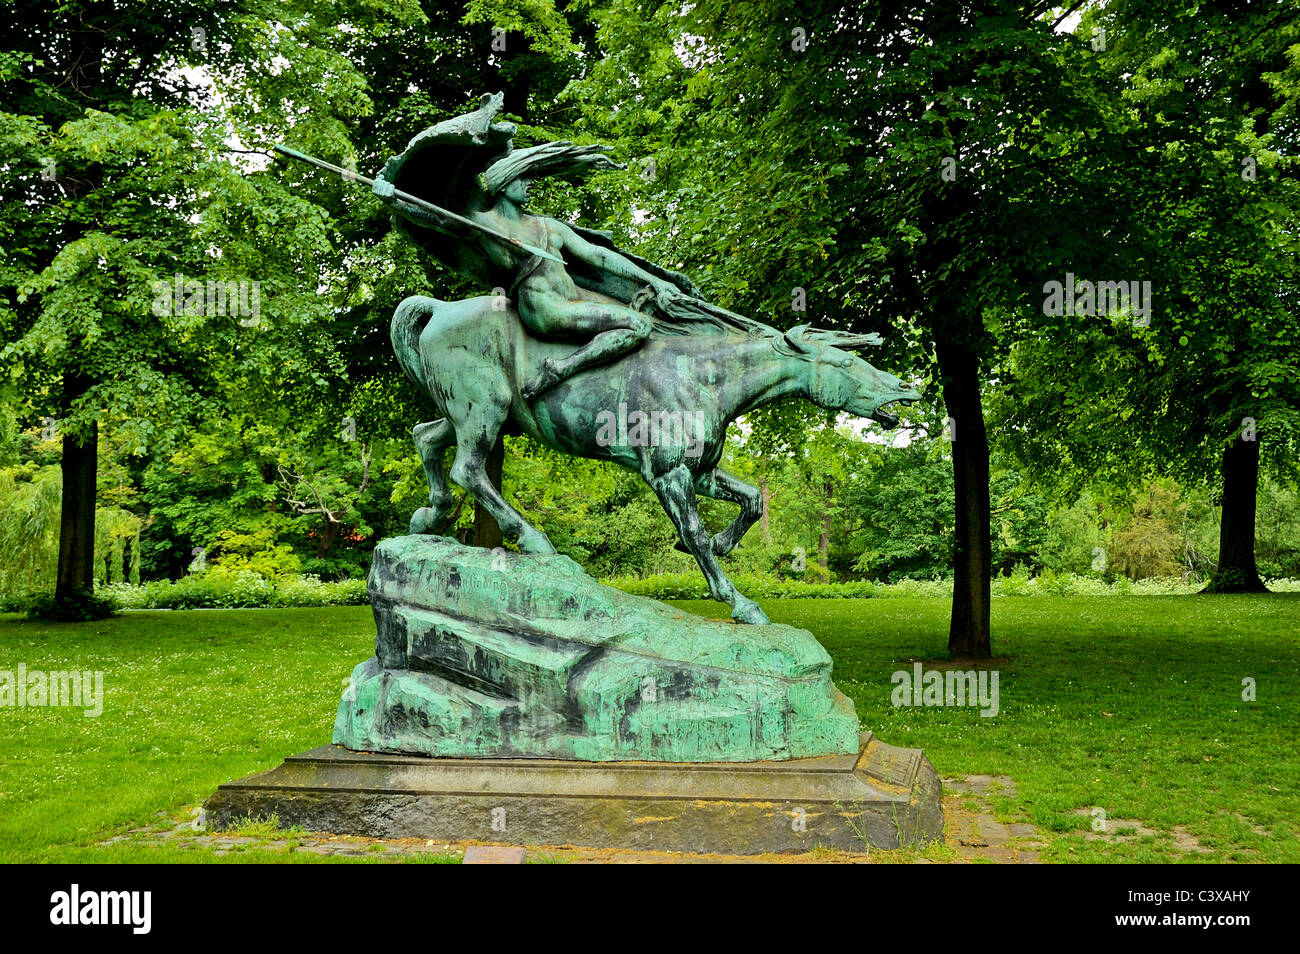 A large bronze statue of a warlike valkyrie riding a horse and carrying a spear, located in Churchill Park, Copenhagen Stock Photo